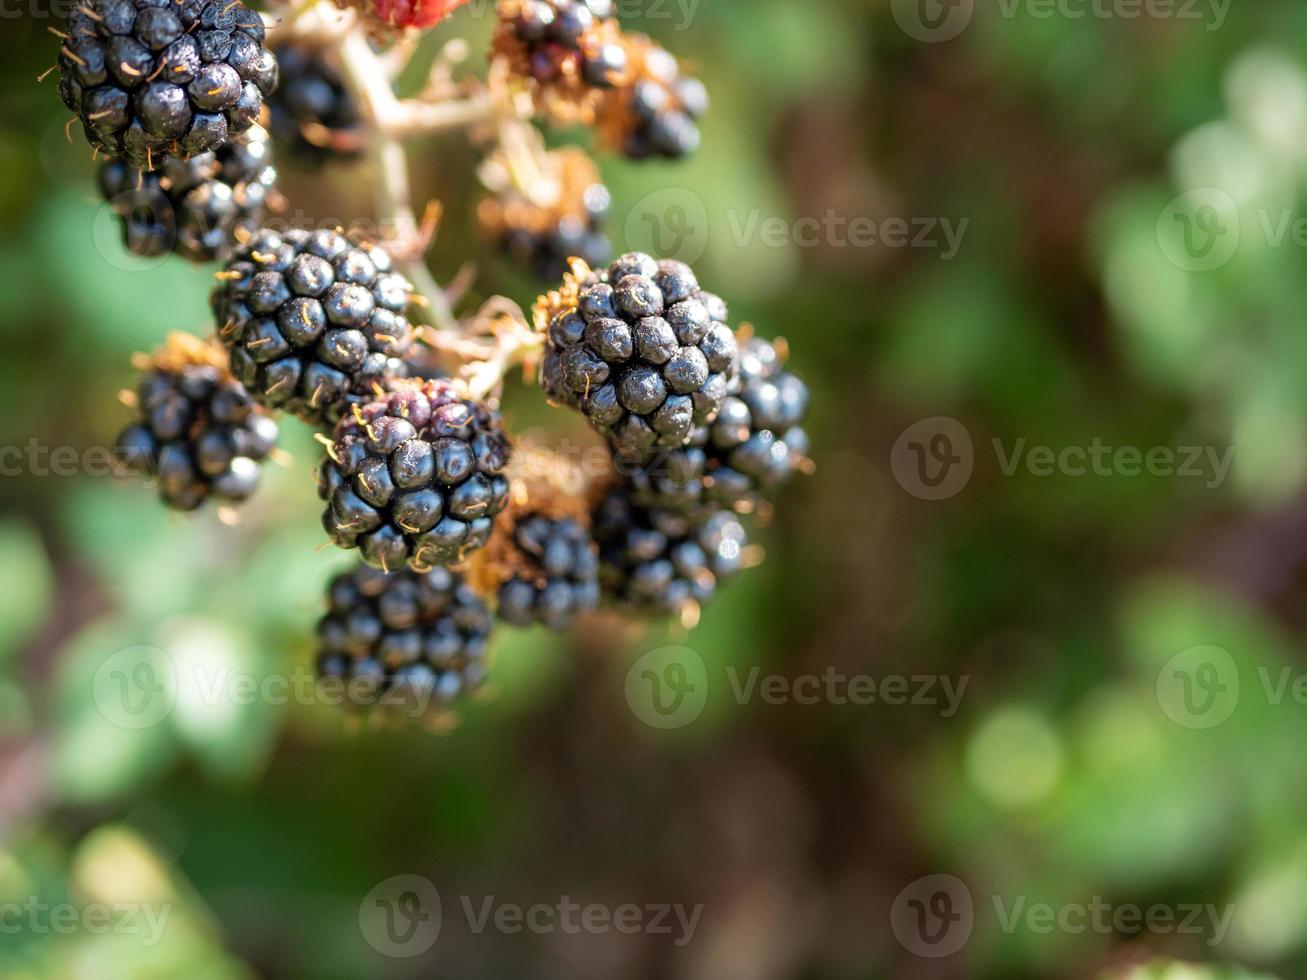 Black Rubus ulmifolius berries on a branch on a natural beckground photo